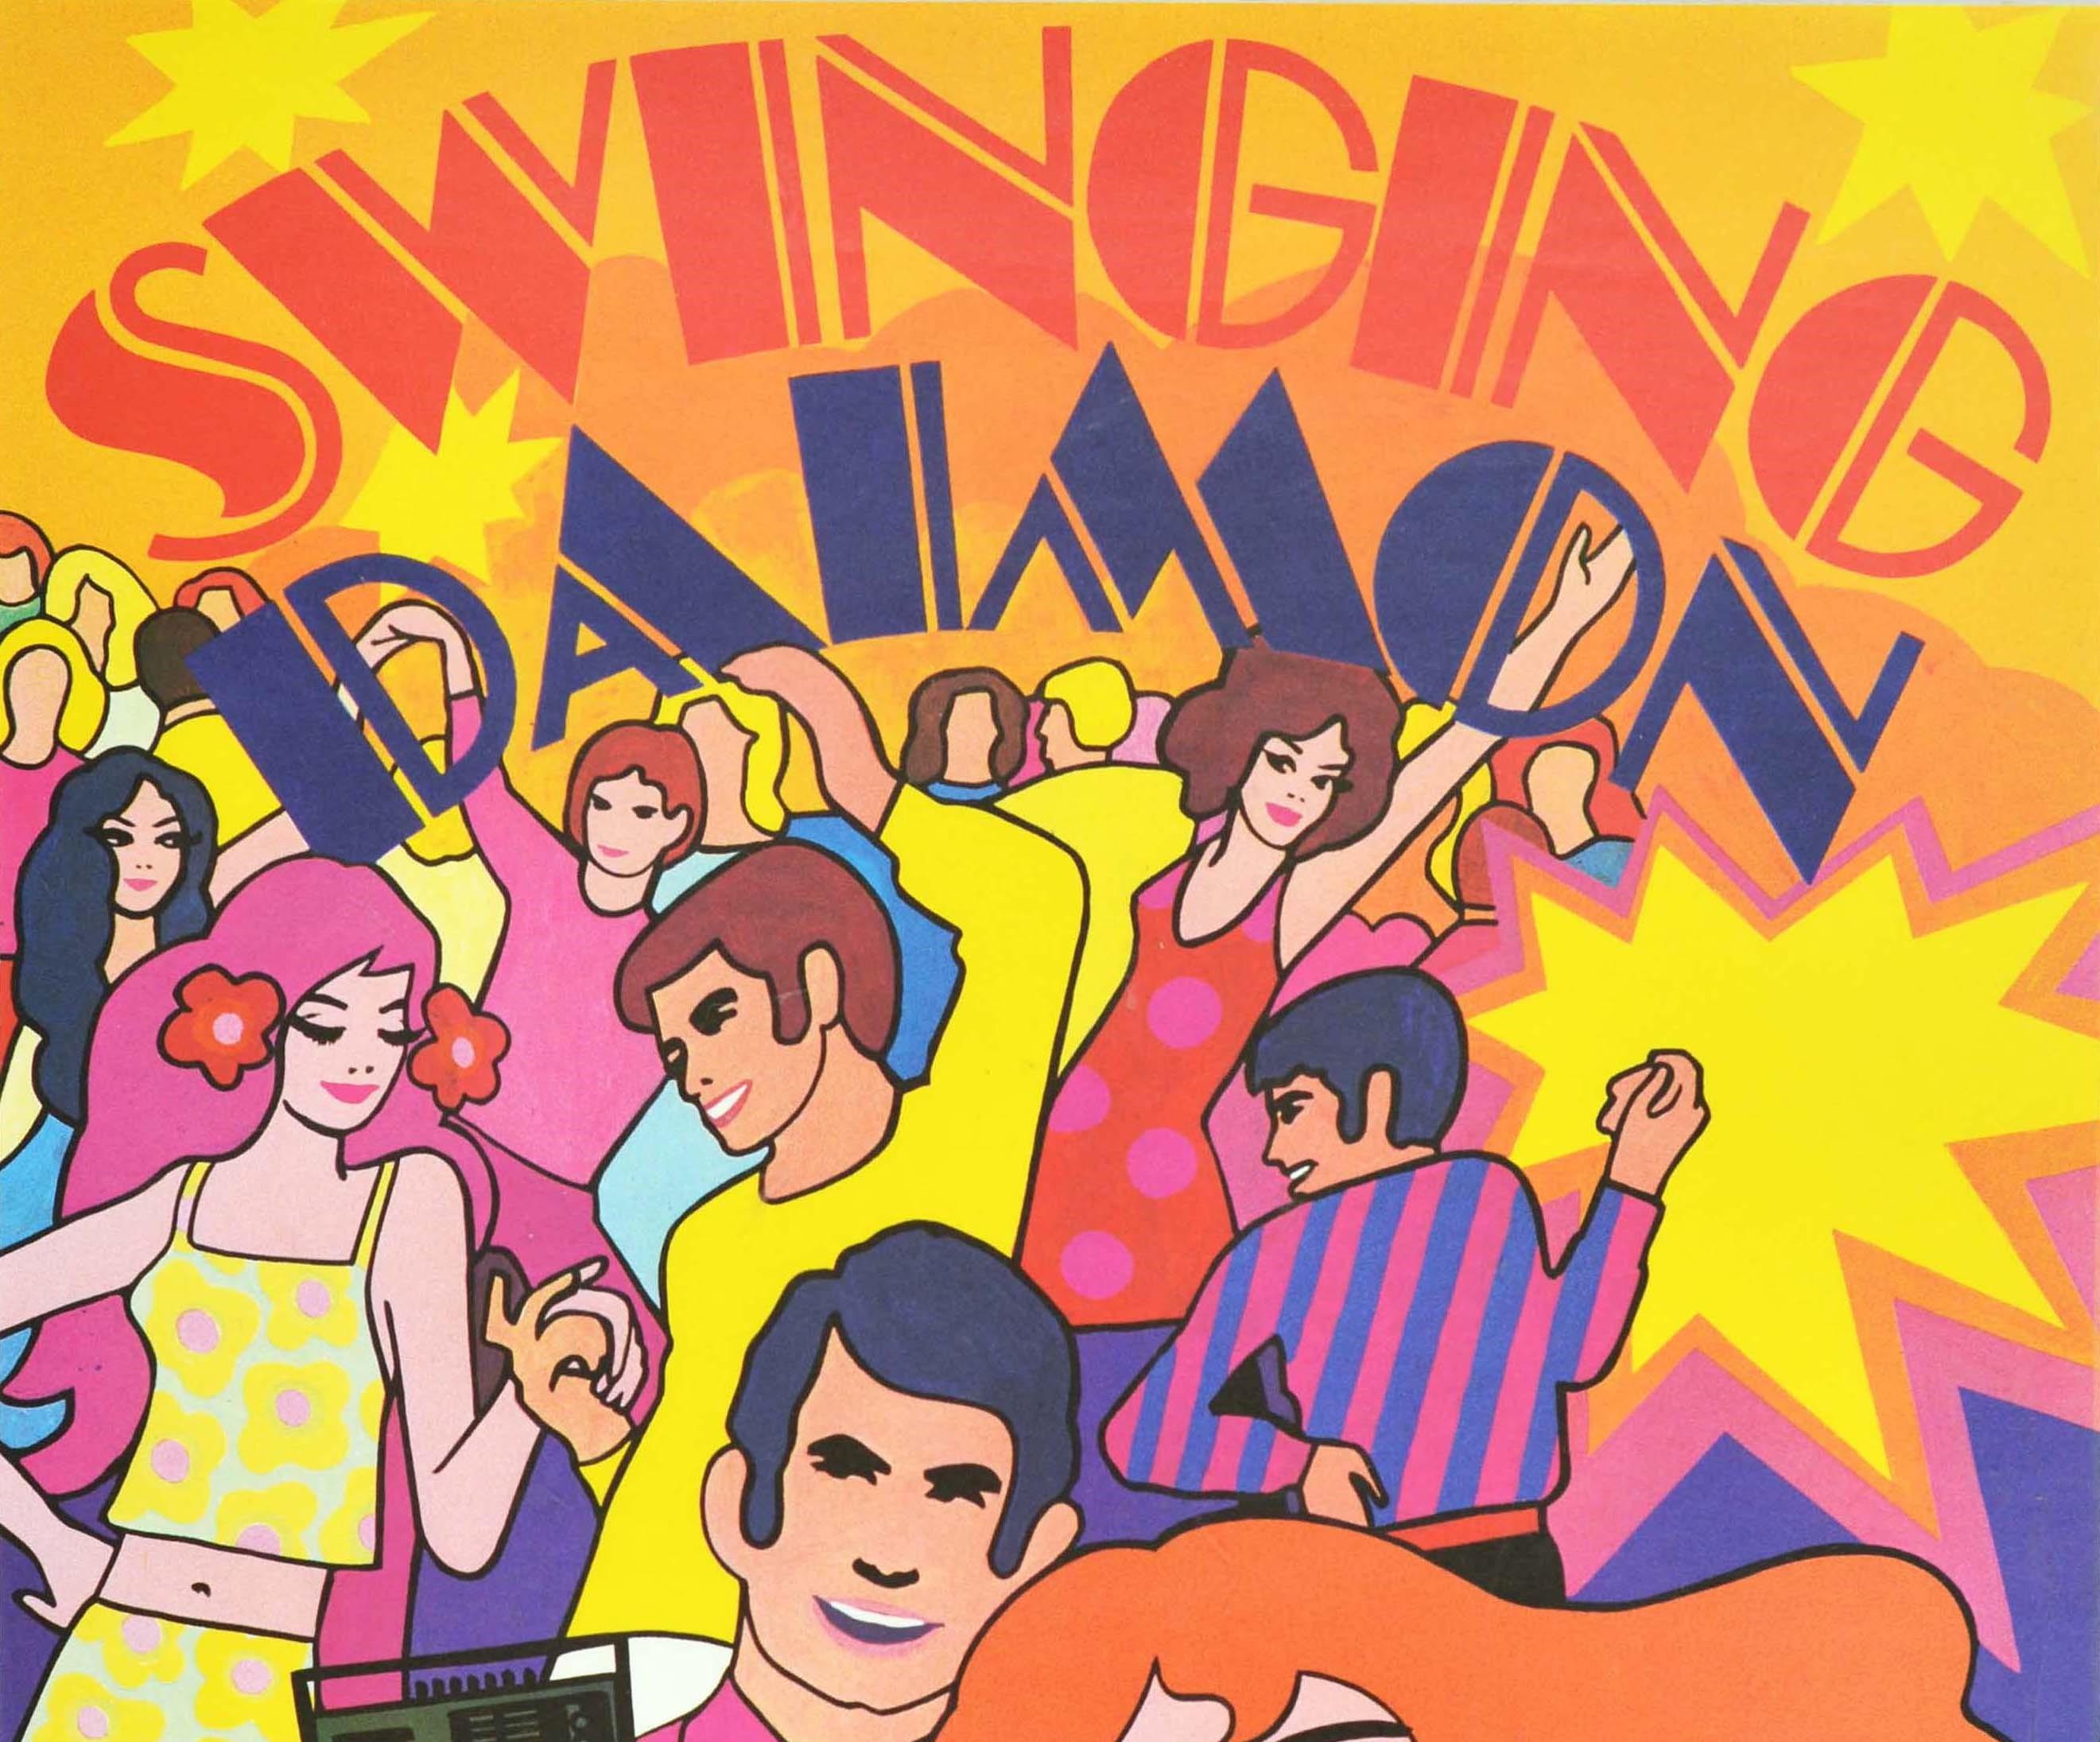 Original vintage advertising poster for Daimon radio - Swinging Diamon - featuring a colourful psychedelic sixties style design depicting happy people dancing in fashionable outfits with a smiling young lady and man holding a portable radio set in